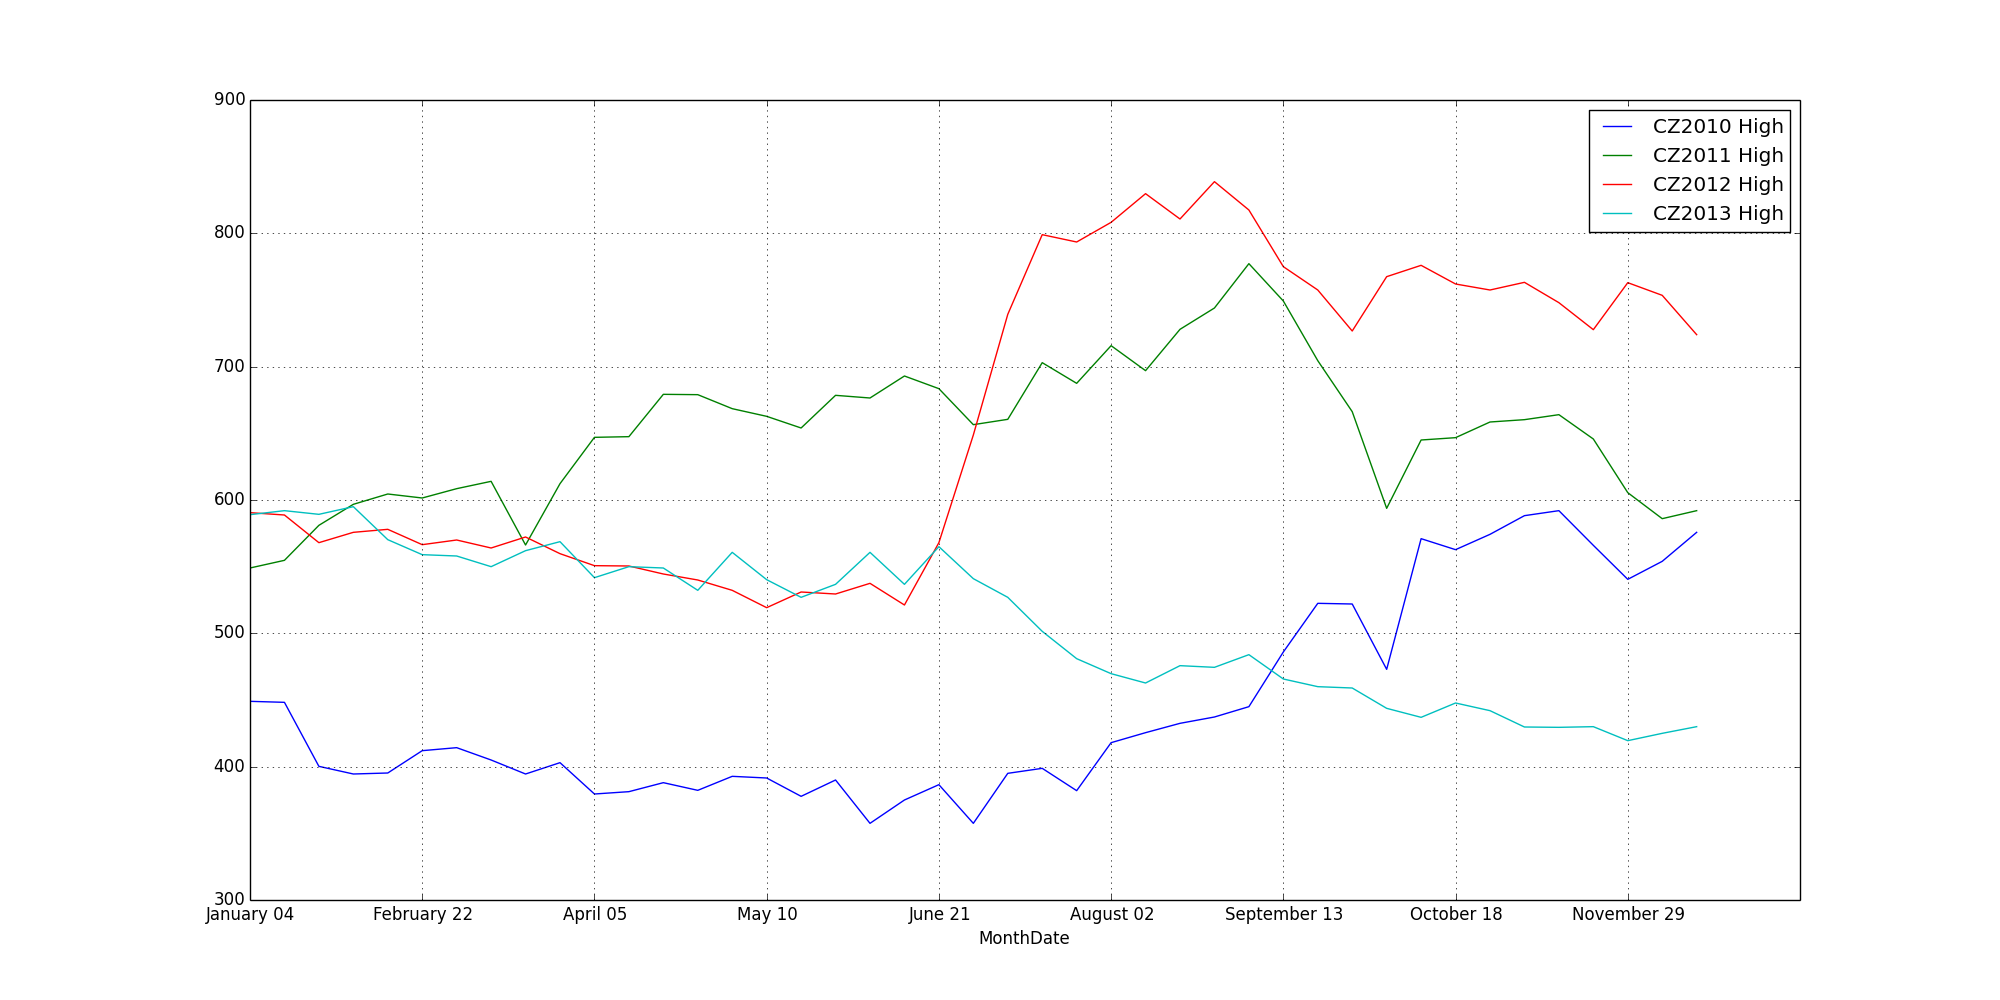 CZ2010 to CZ2013 Partial only overlapping trade dates are included Line Graph